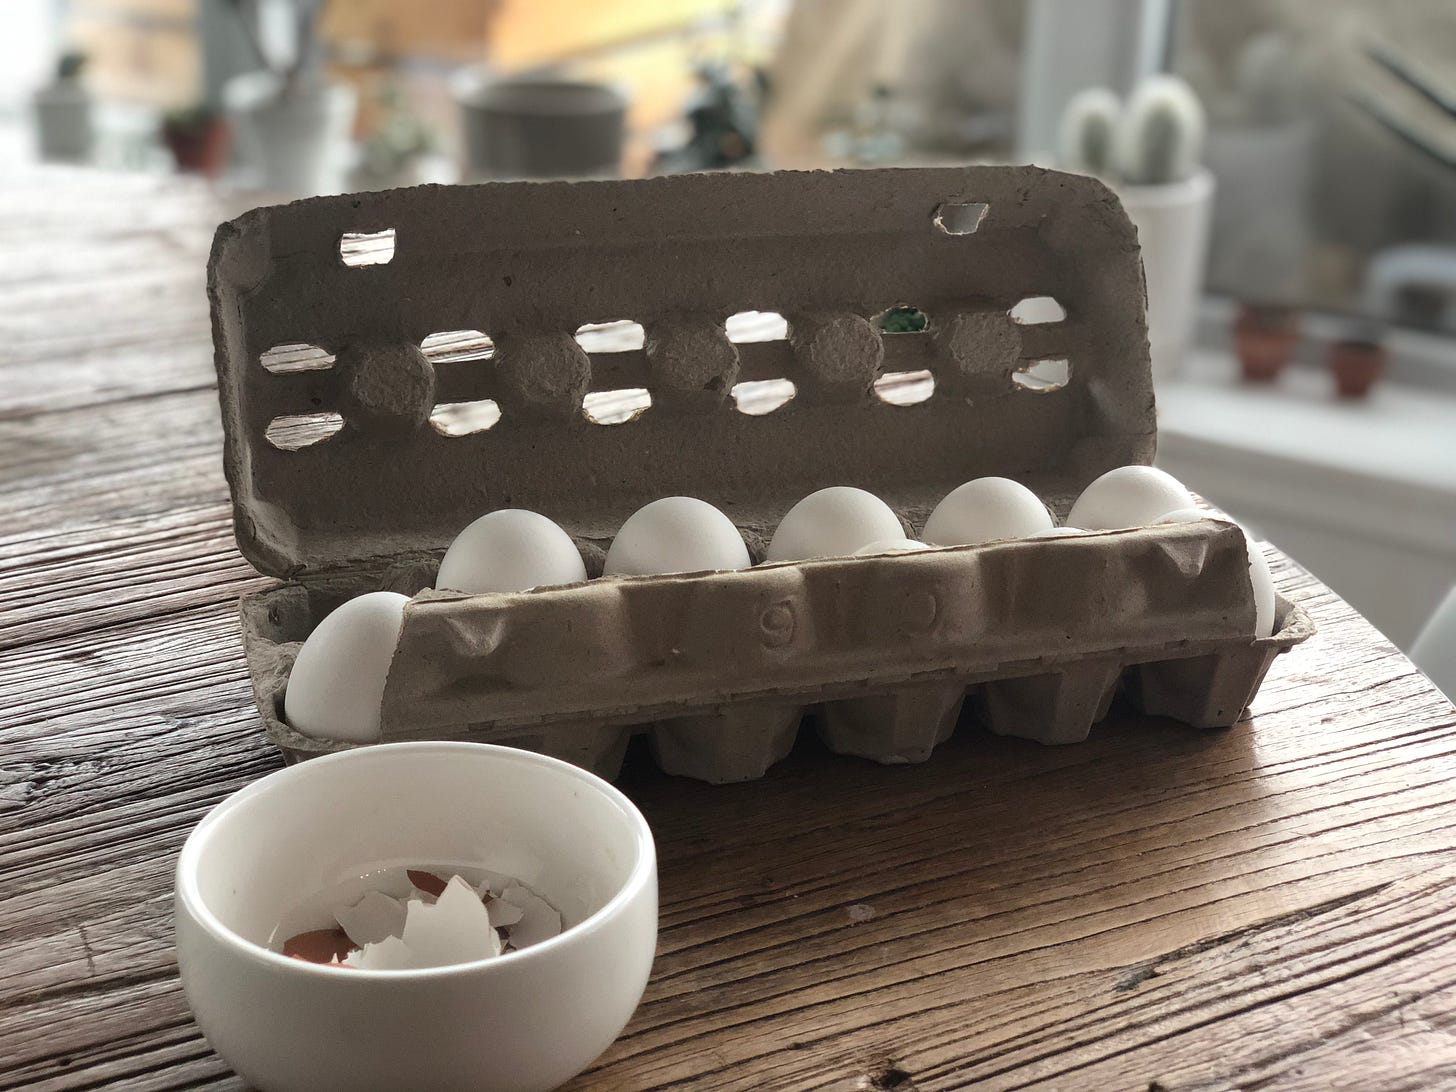 A carton of eggs and a small bowl of eggshells